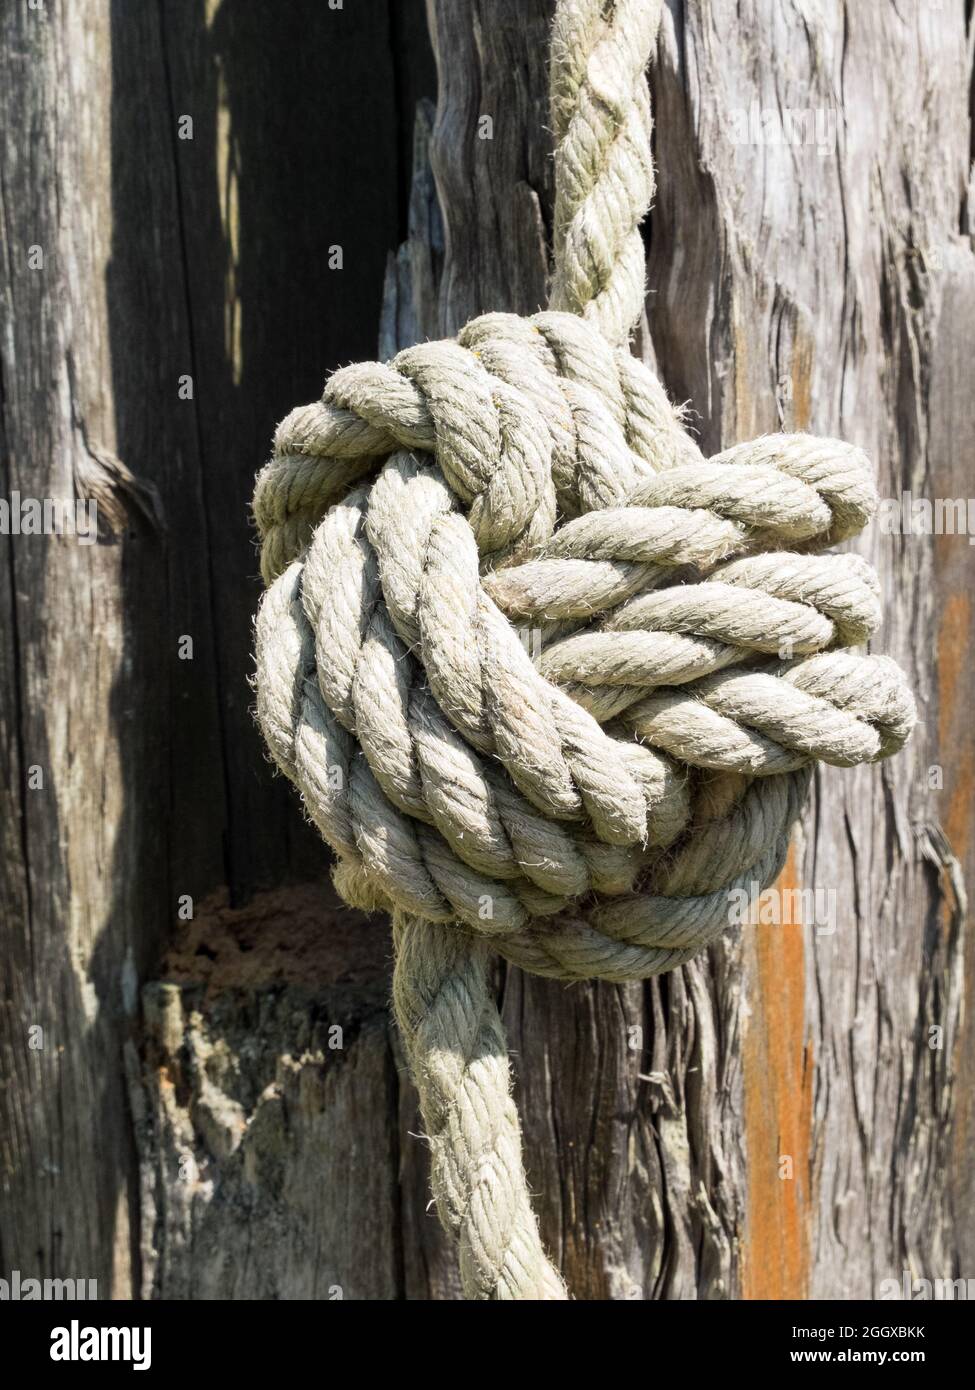 A Turk's Head knot in a large rope on a textured wooden background Stock Photo